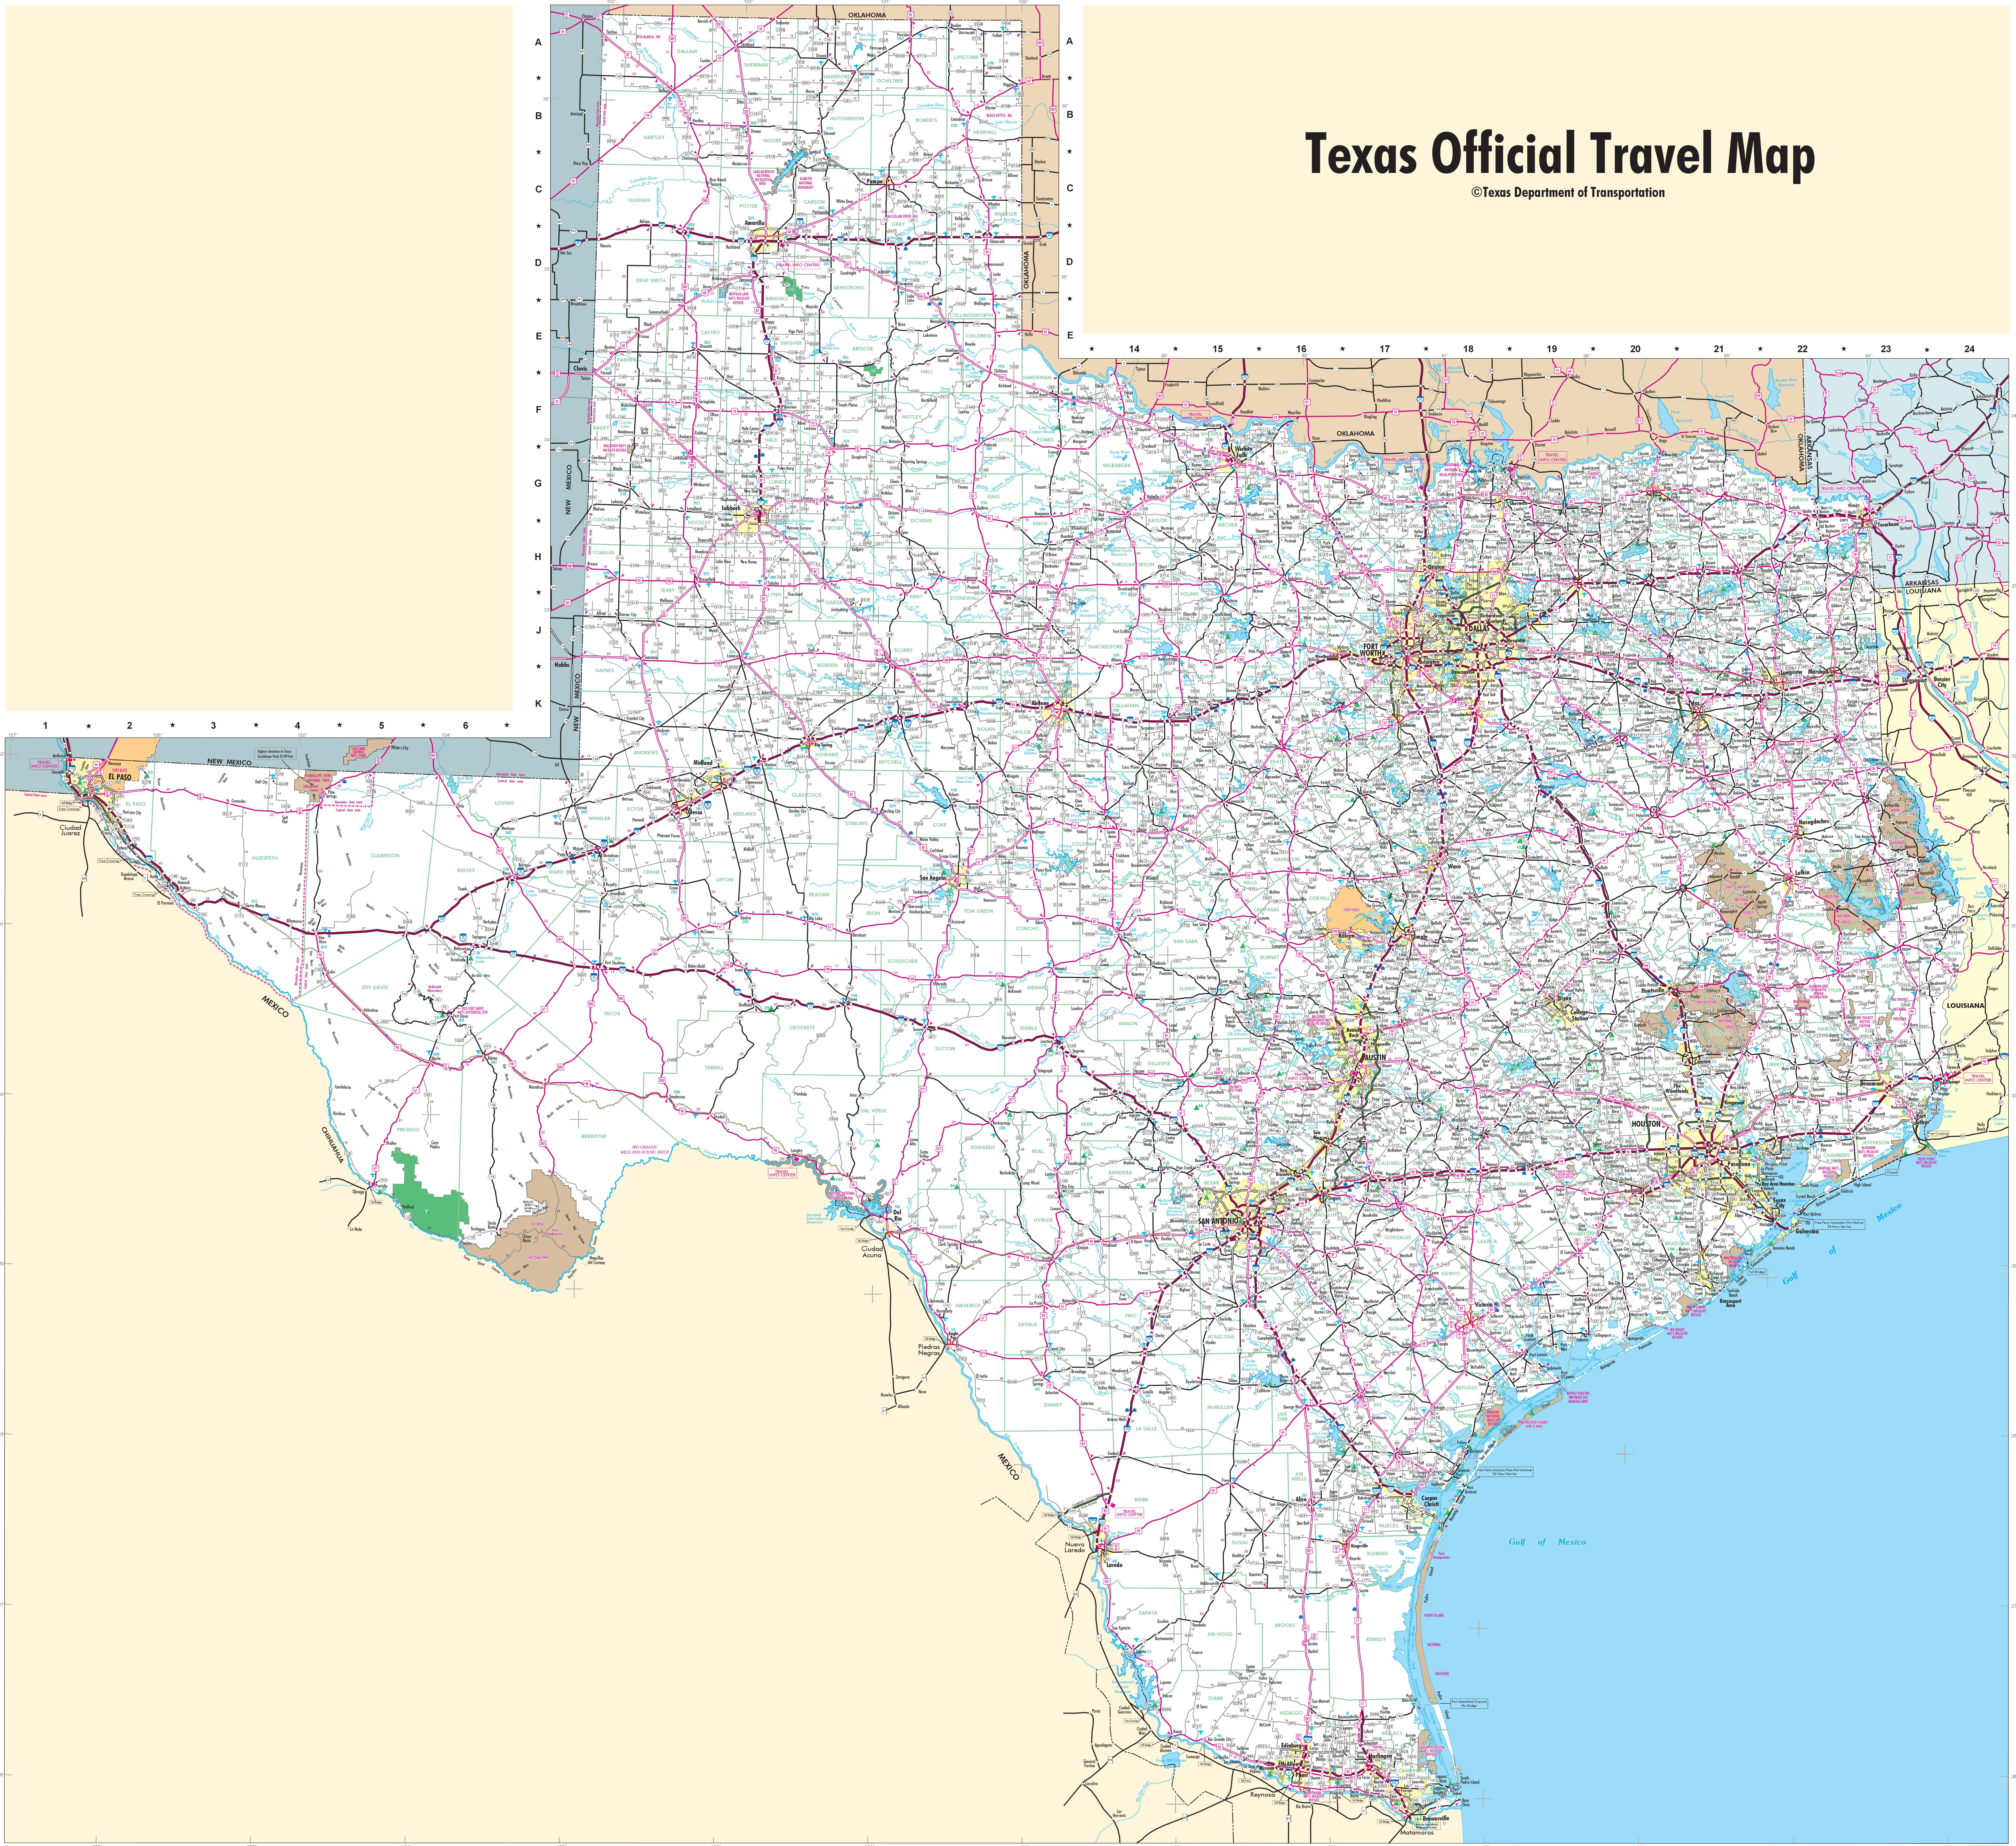 Texas Road Map Printableimages Of Photo Albumslarge Detailed Map Of - Texas Road Map 2018